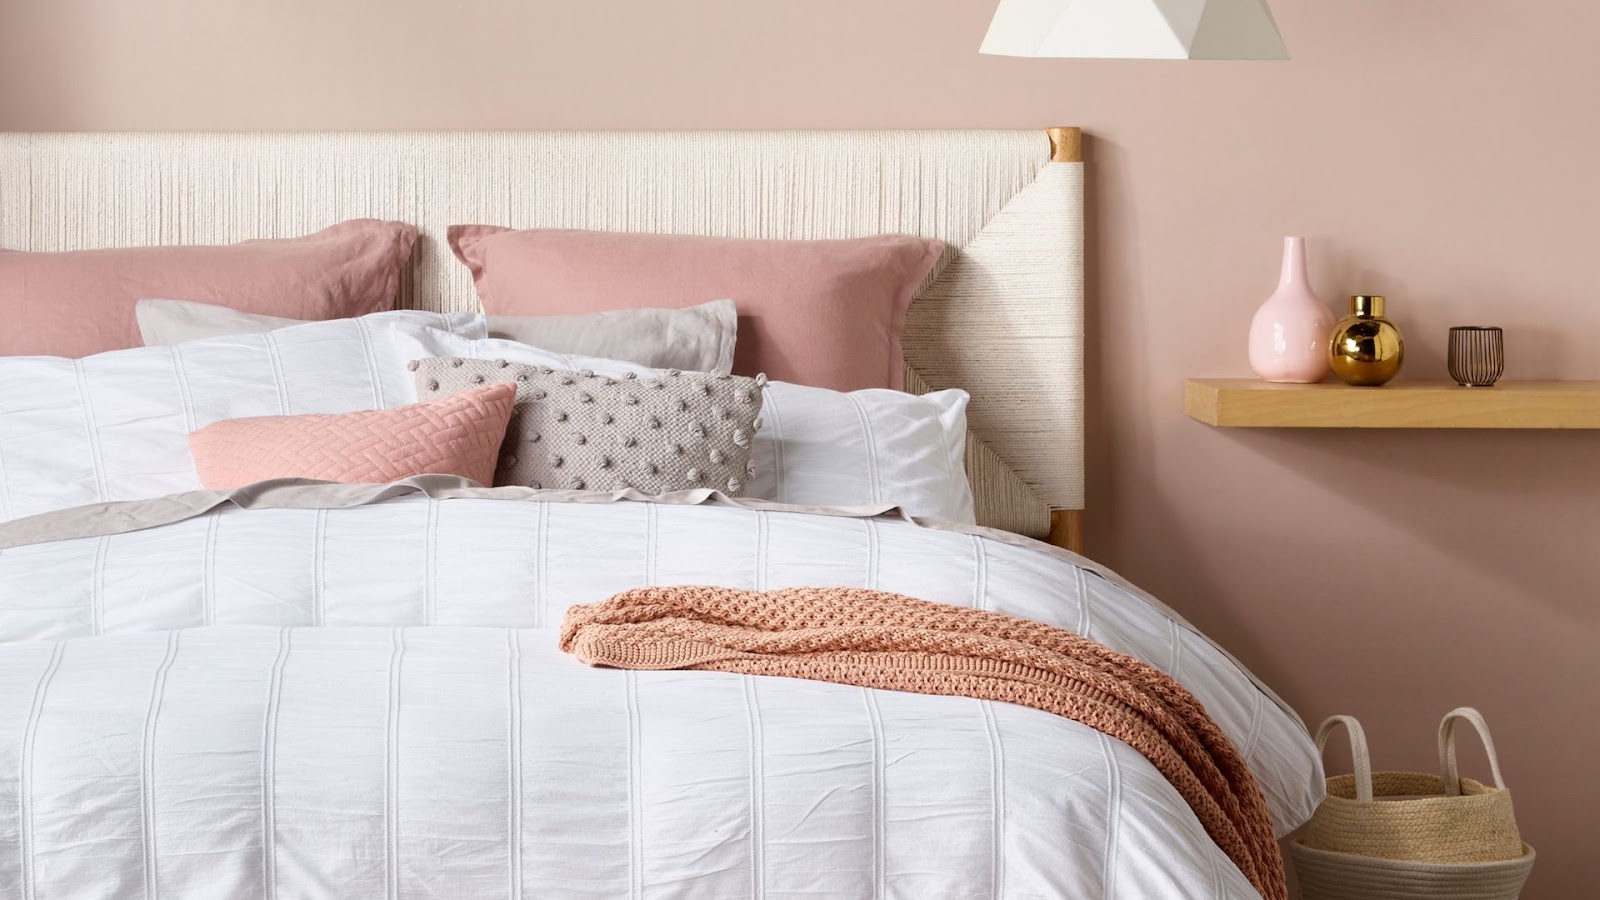 Choose Textured Bedding and Bed Linen